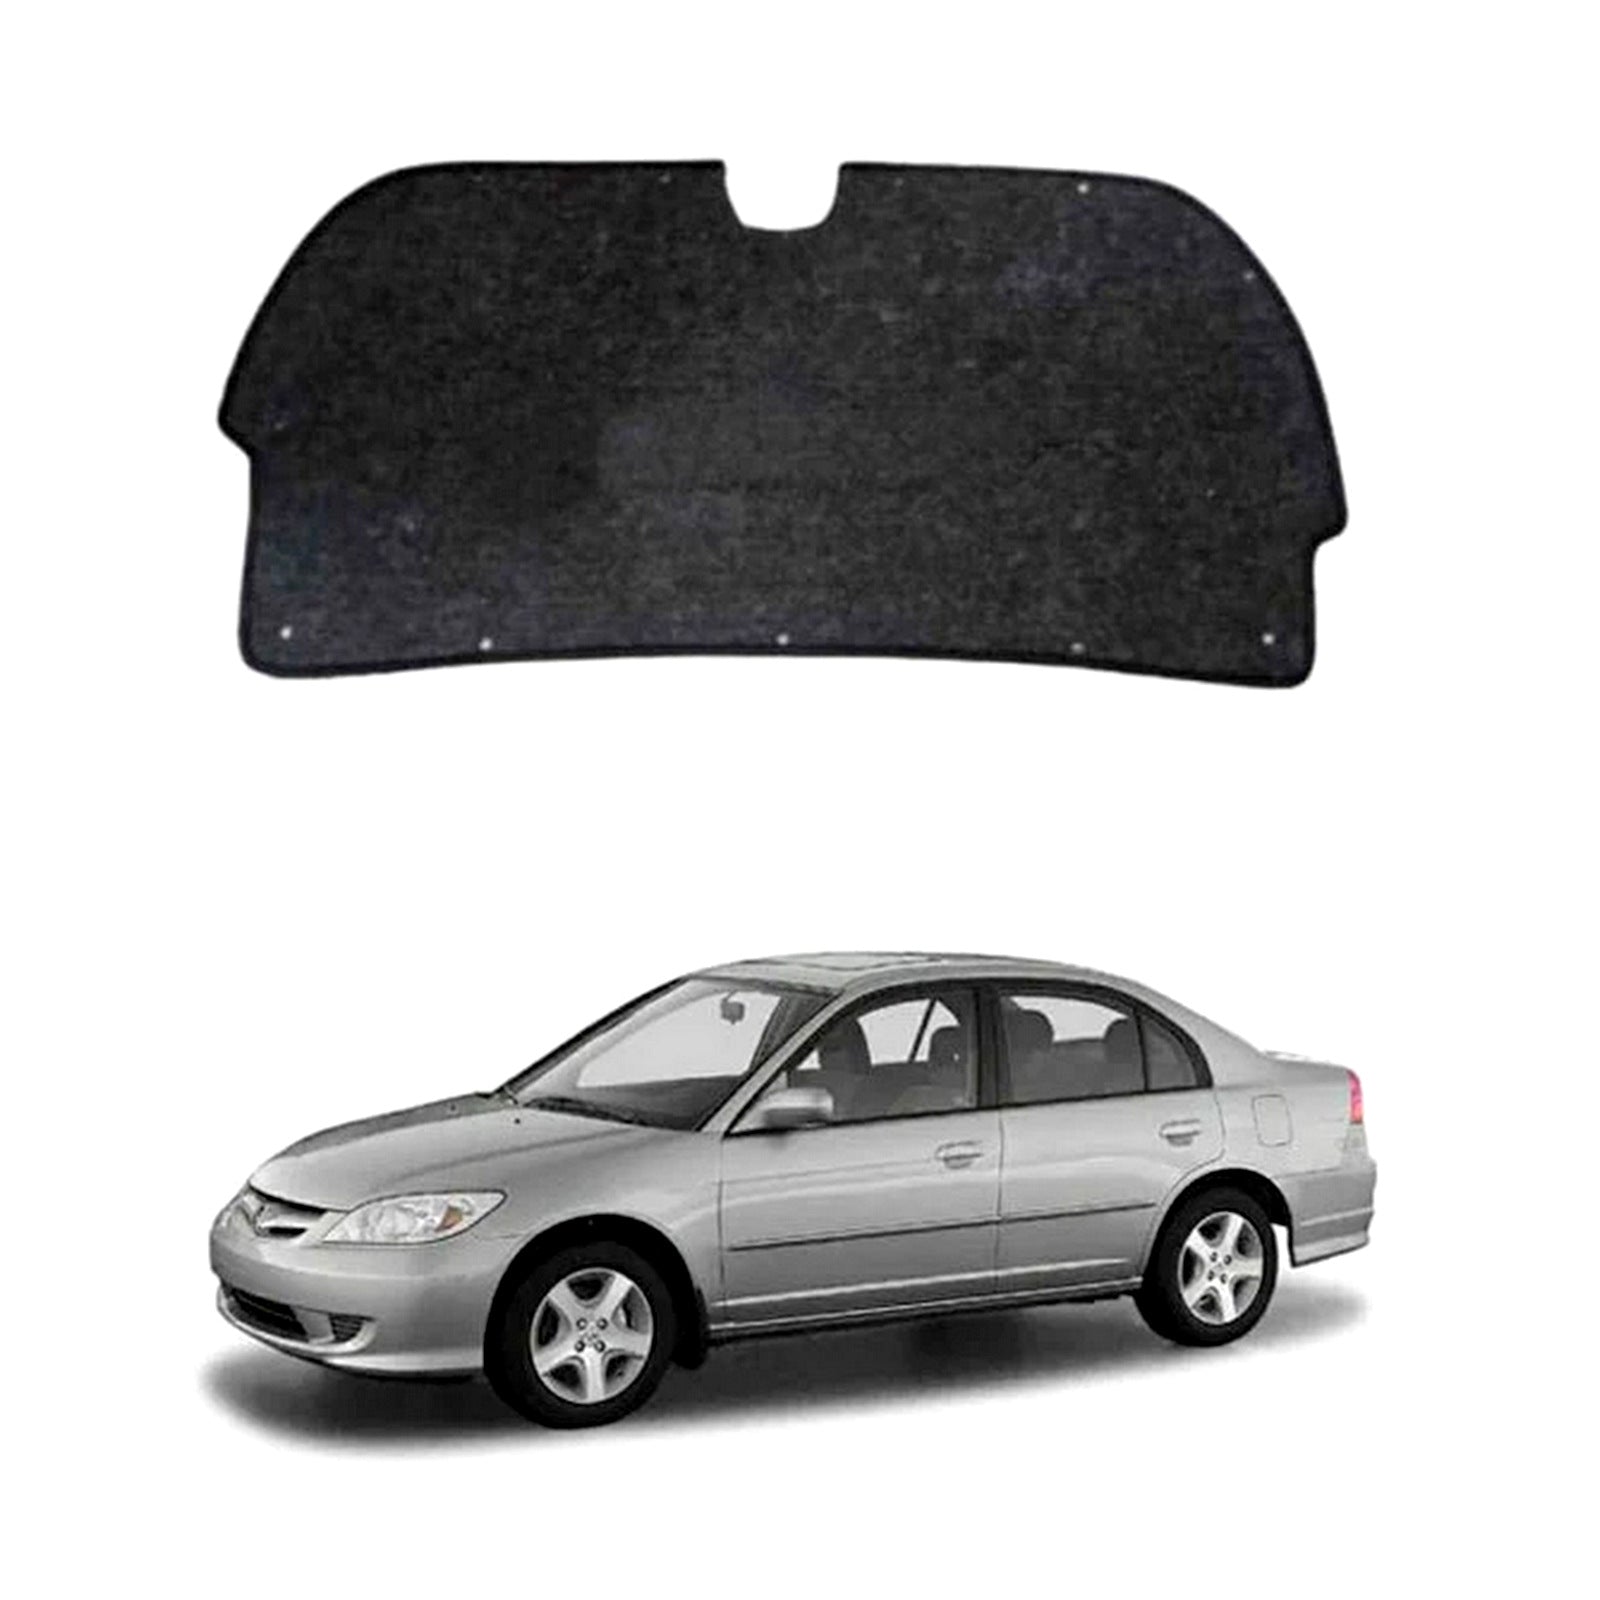 TRUNK LINER PROTECTOR FOR HONDA CIVIC (2004-2006)